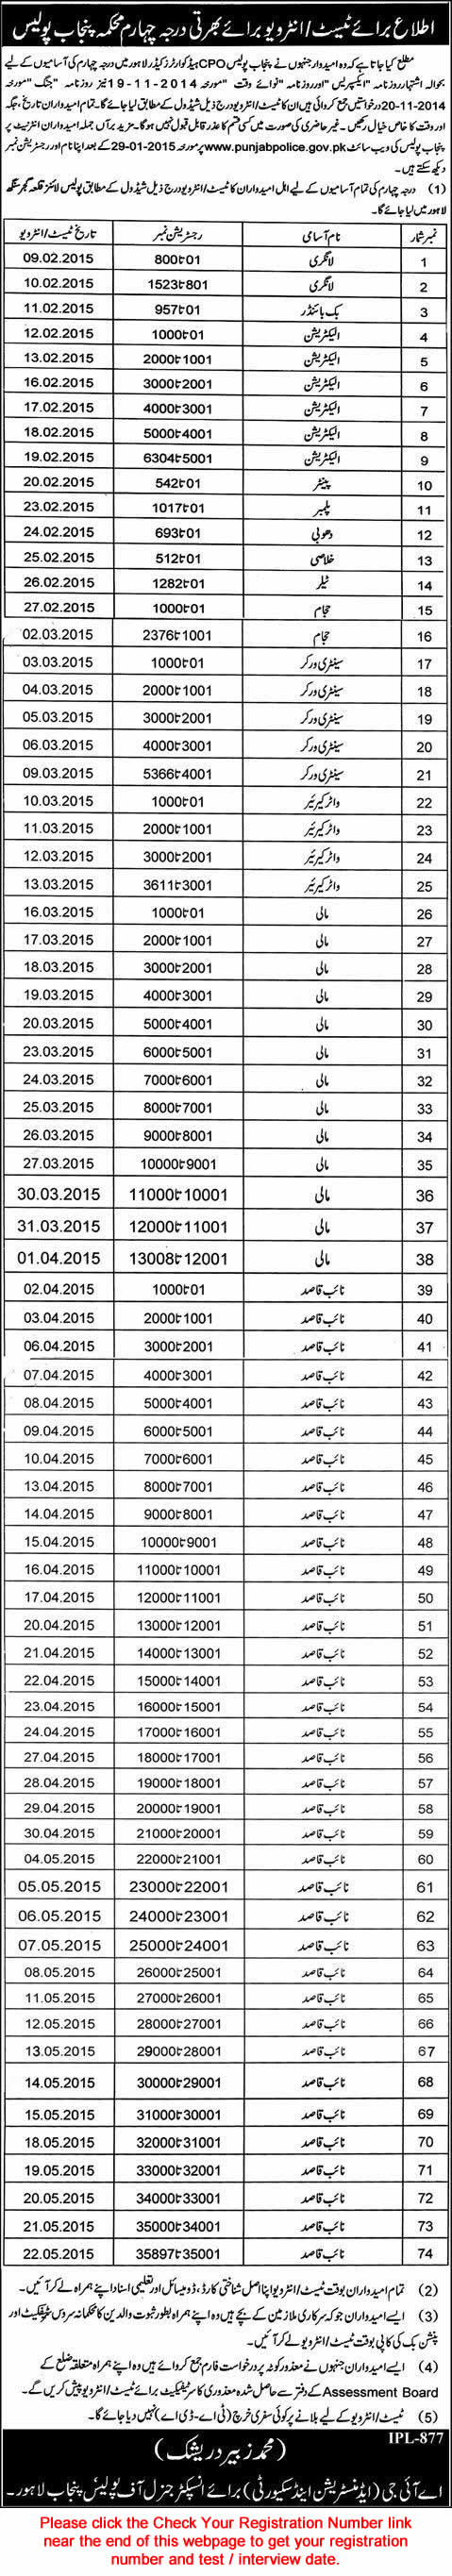 Punjab Police Jobs 2014-2015 Test / Interview Schedule Naib Qasid, Mali, Electrician, Sanitary Worker & Others